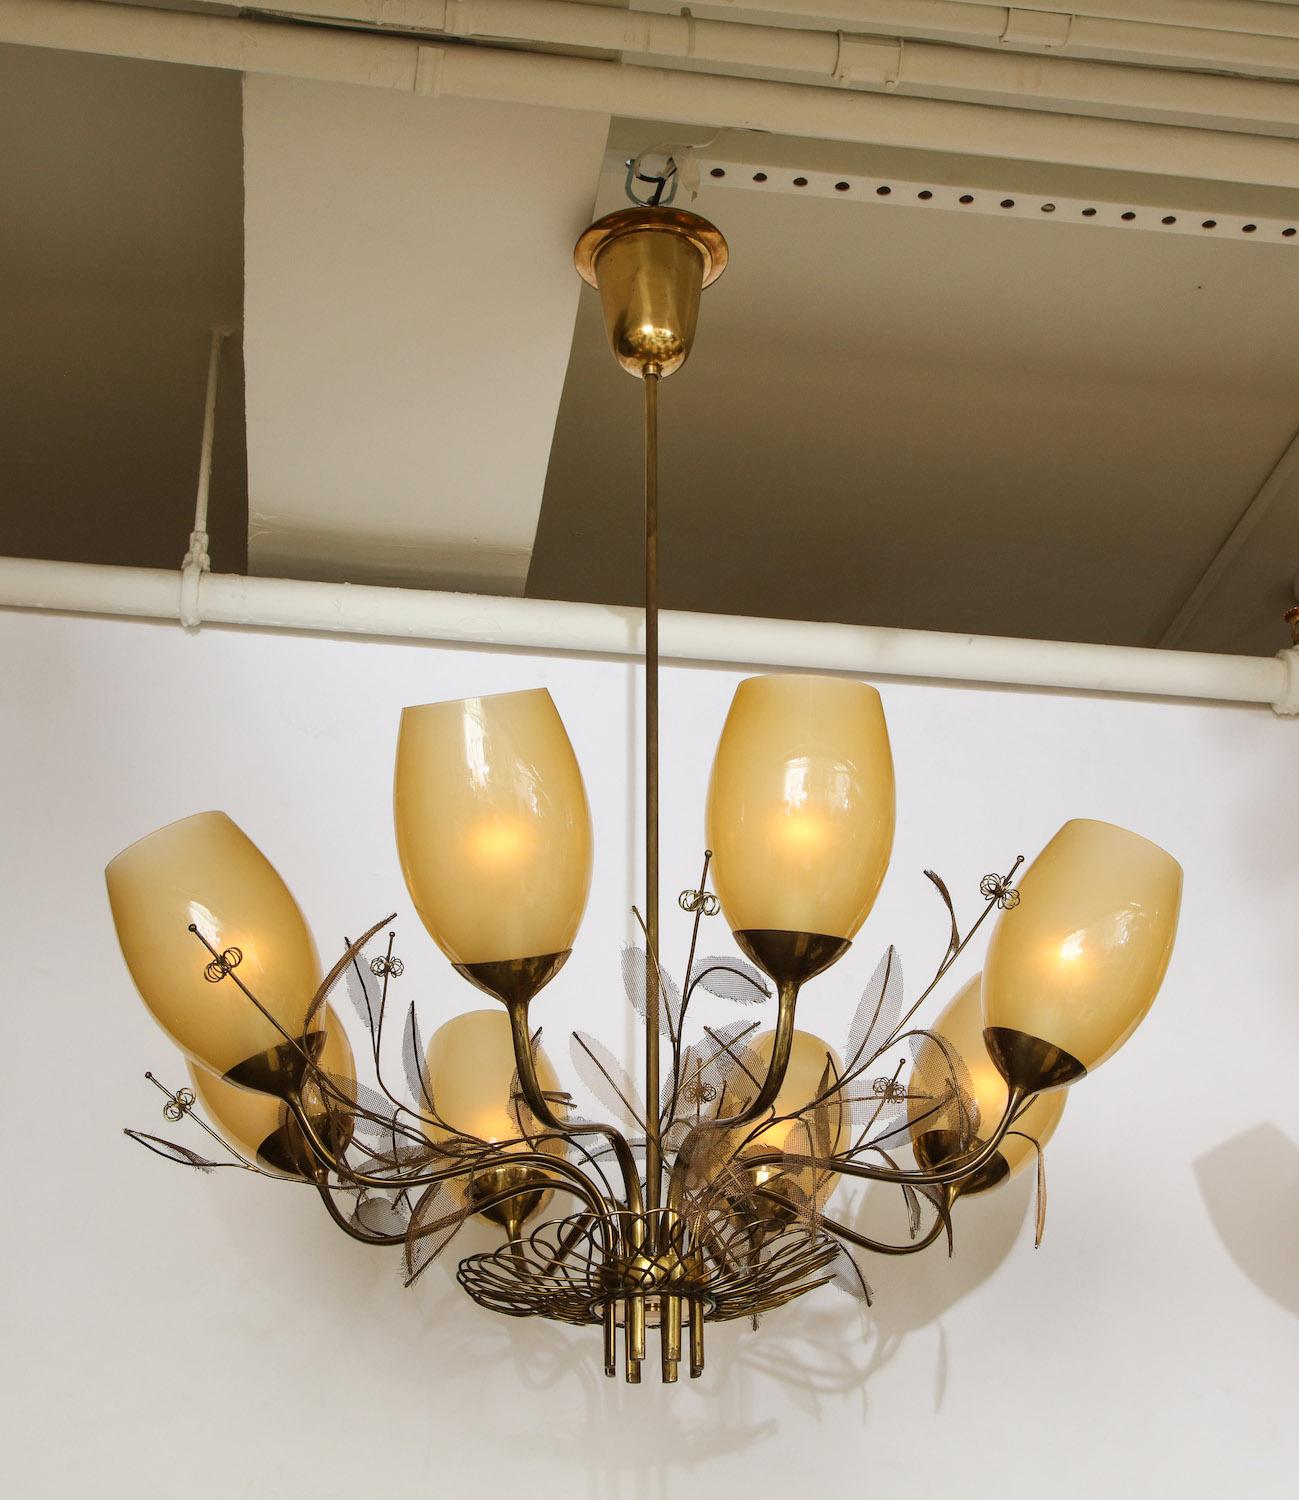 Rare Paavo Tynell 8-light chandeliers. Model #9029/8, brass structures with unusual detailing and brass-mesh leaves. Each chandelier features 8 arms ending with a standard edison socket surrounded by original gold-hued glass shades. This fixture has